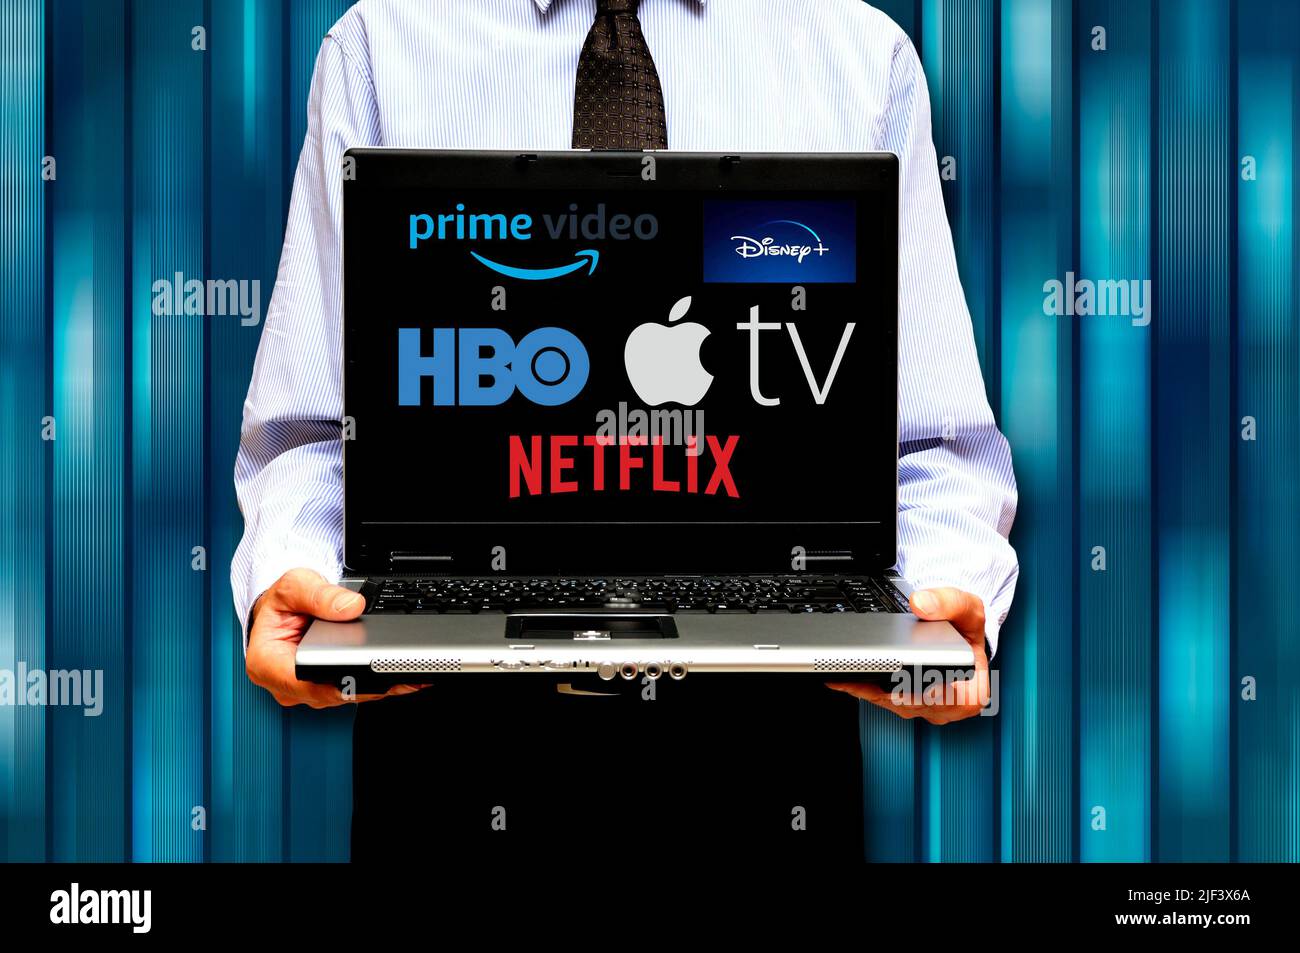 man with laptop and various streaming video services logo on screen Stock Photo